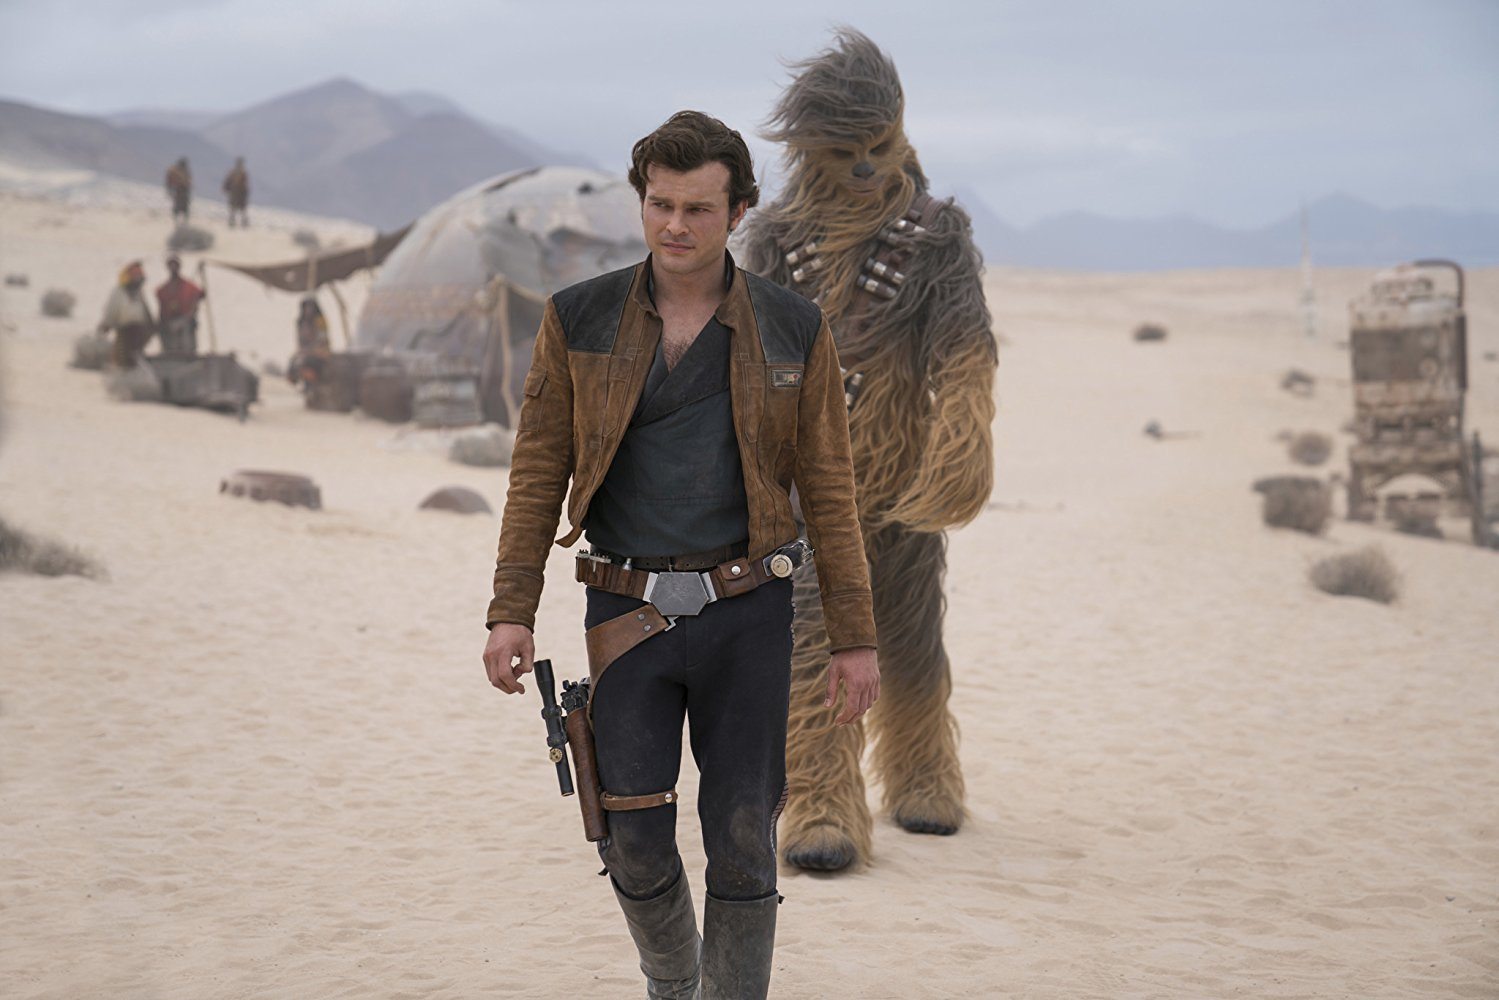 Chewie and Han in 'Solo: A Star Wars Story'.